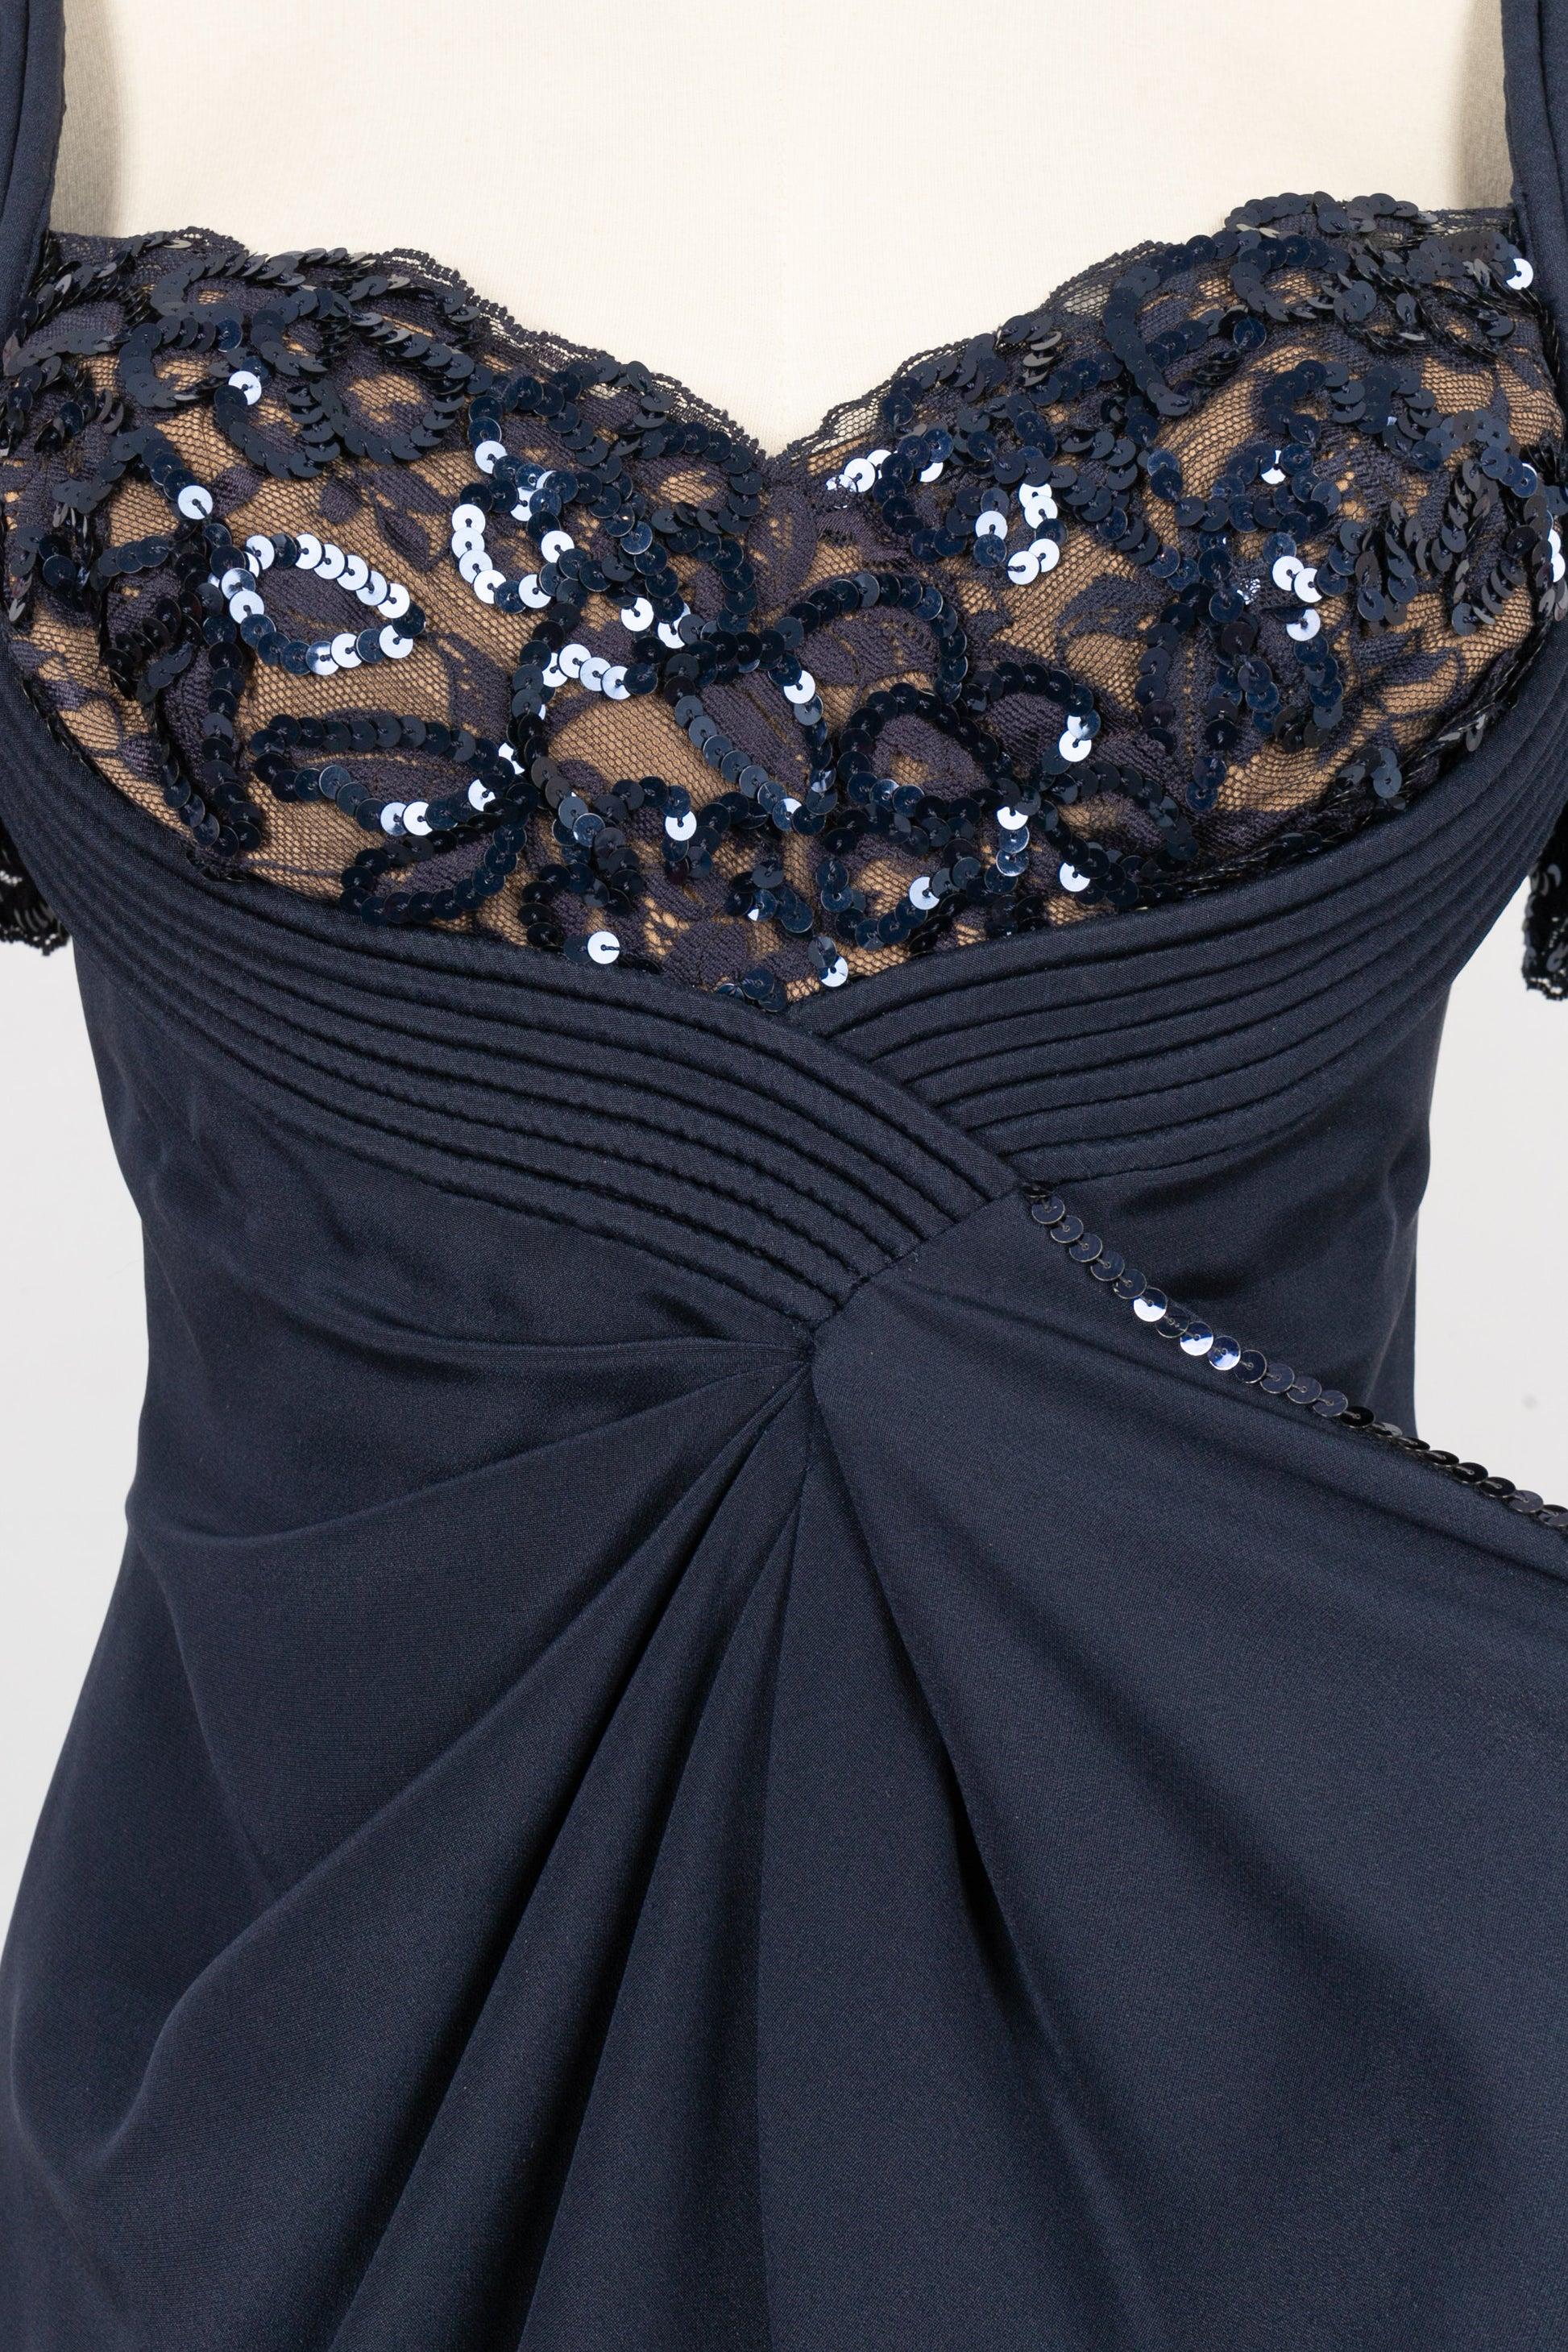 Loris Azzaro Midnight Blue Evening Dress in Taffeta, Lace and Sequins For Sale 4